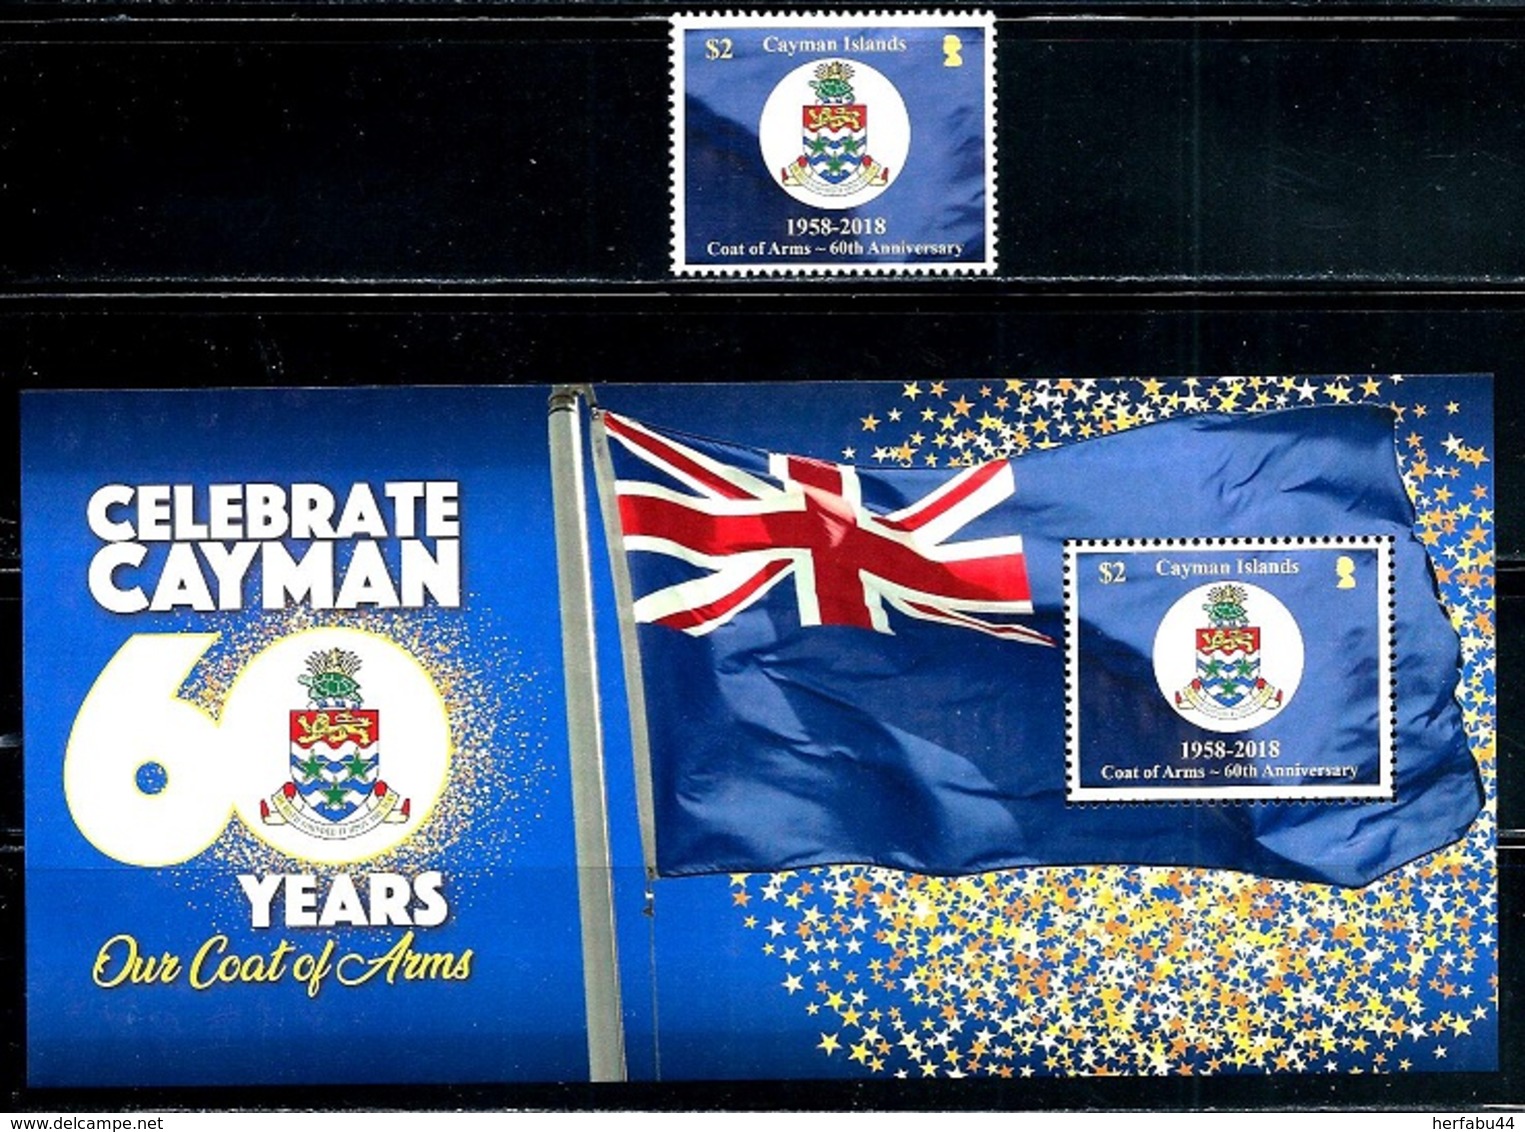 Cayman Islands "60th Anniv. Of  Coat Of Arms"    New Issue   October 19-2018   Set & Souvenir Sheet  MNH - Cayman Islands